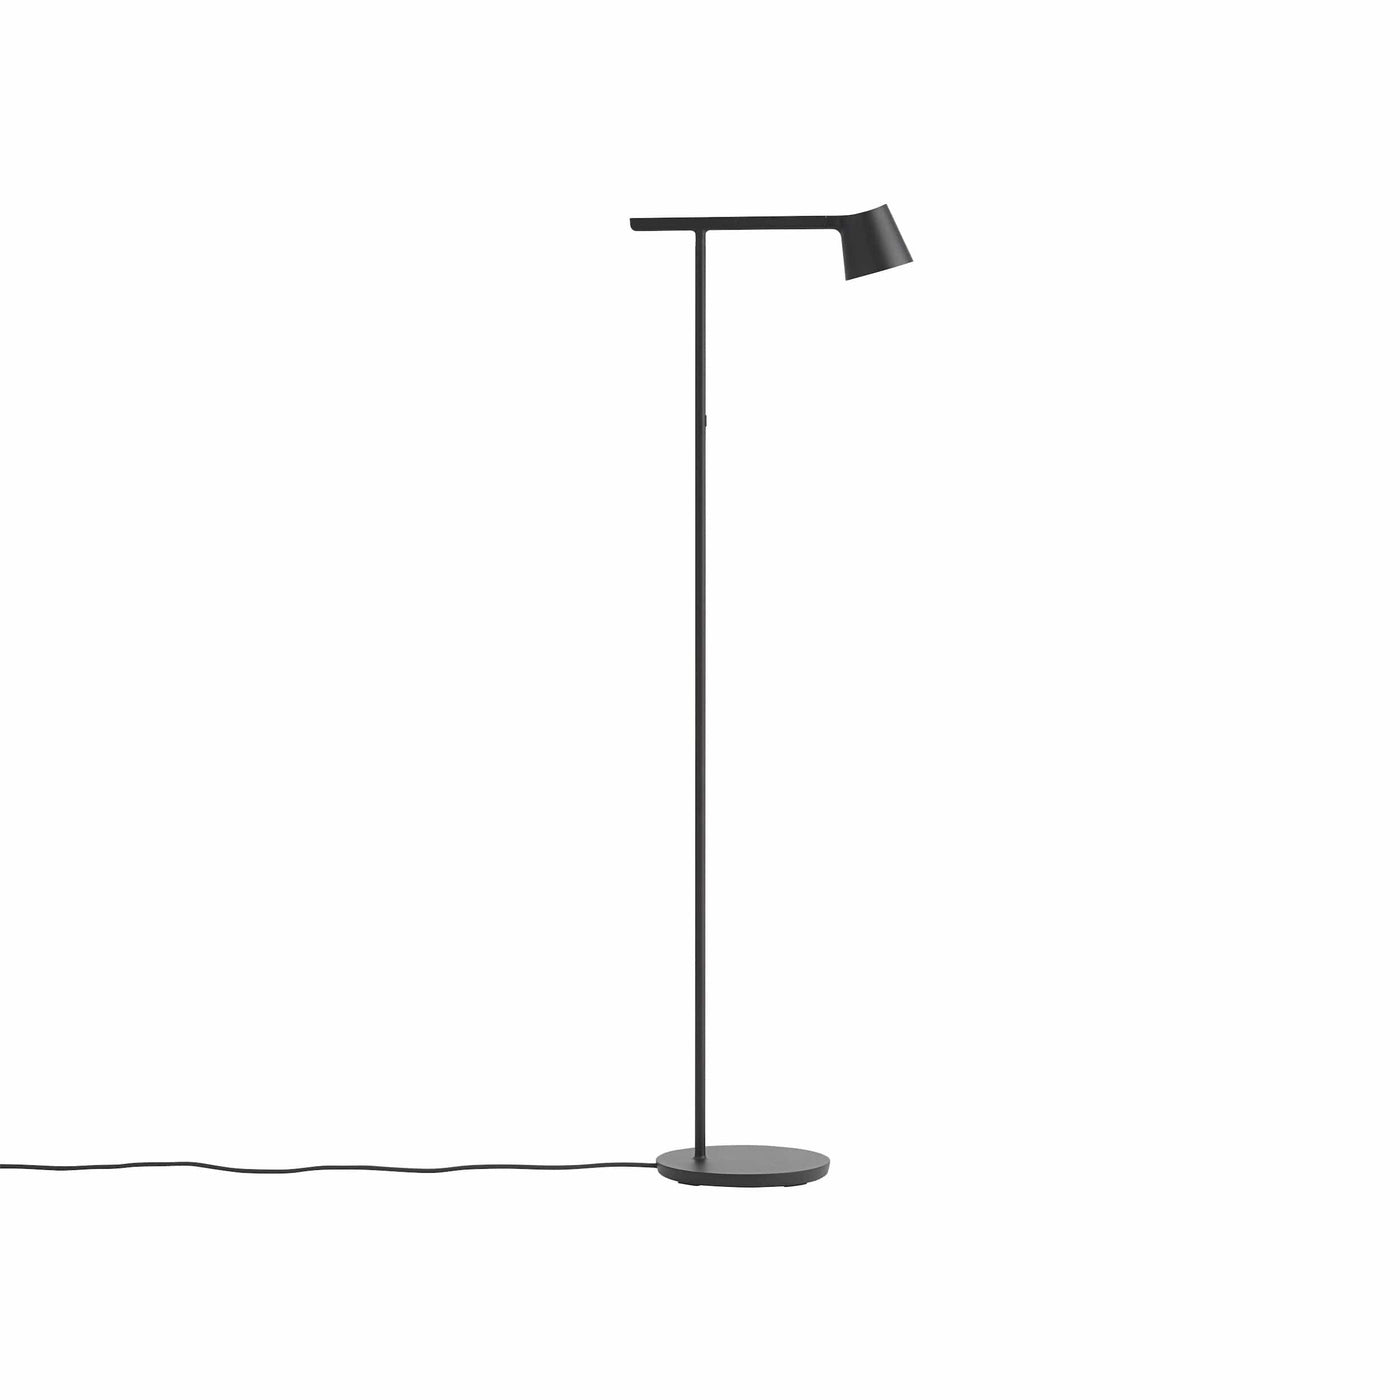 Muuto Tip Floor Lamp in black. Available from someday designs.  #colour_black